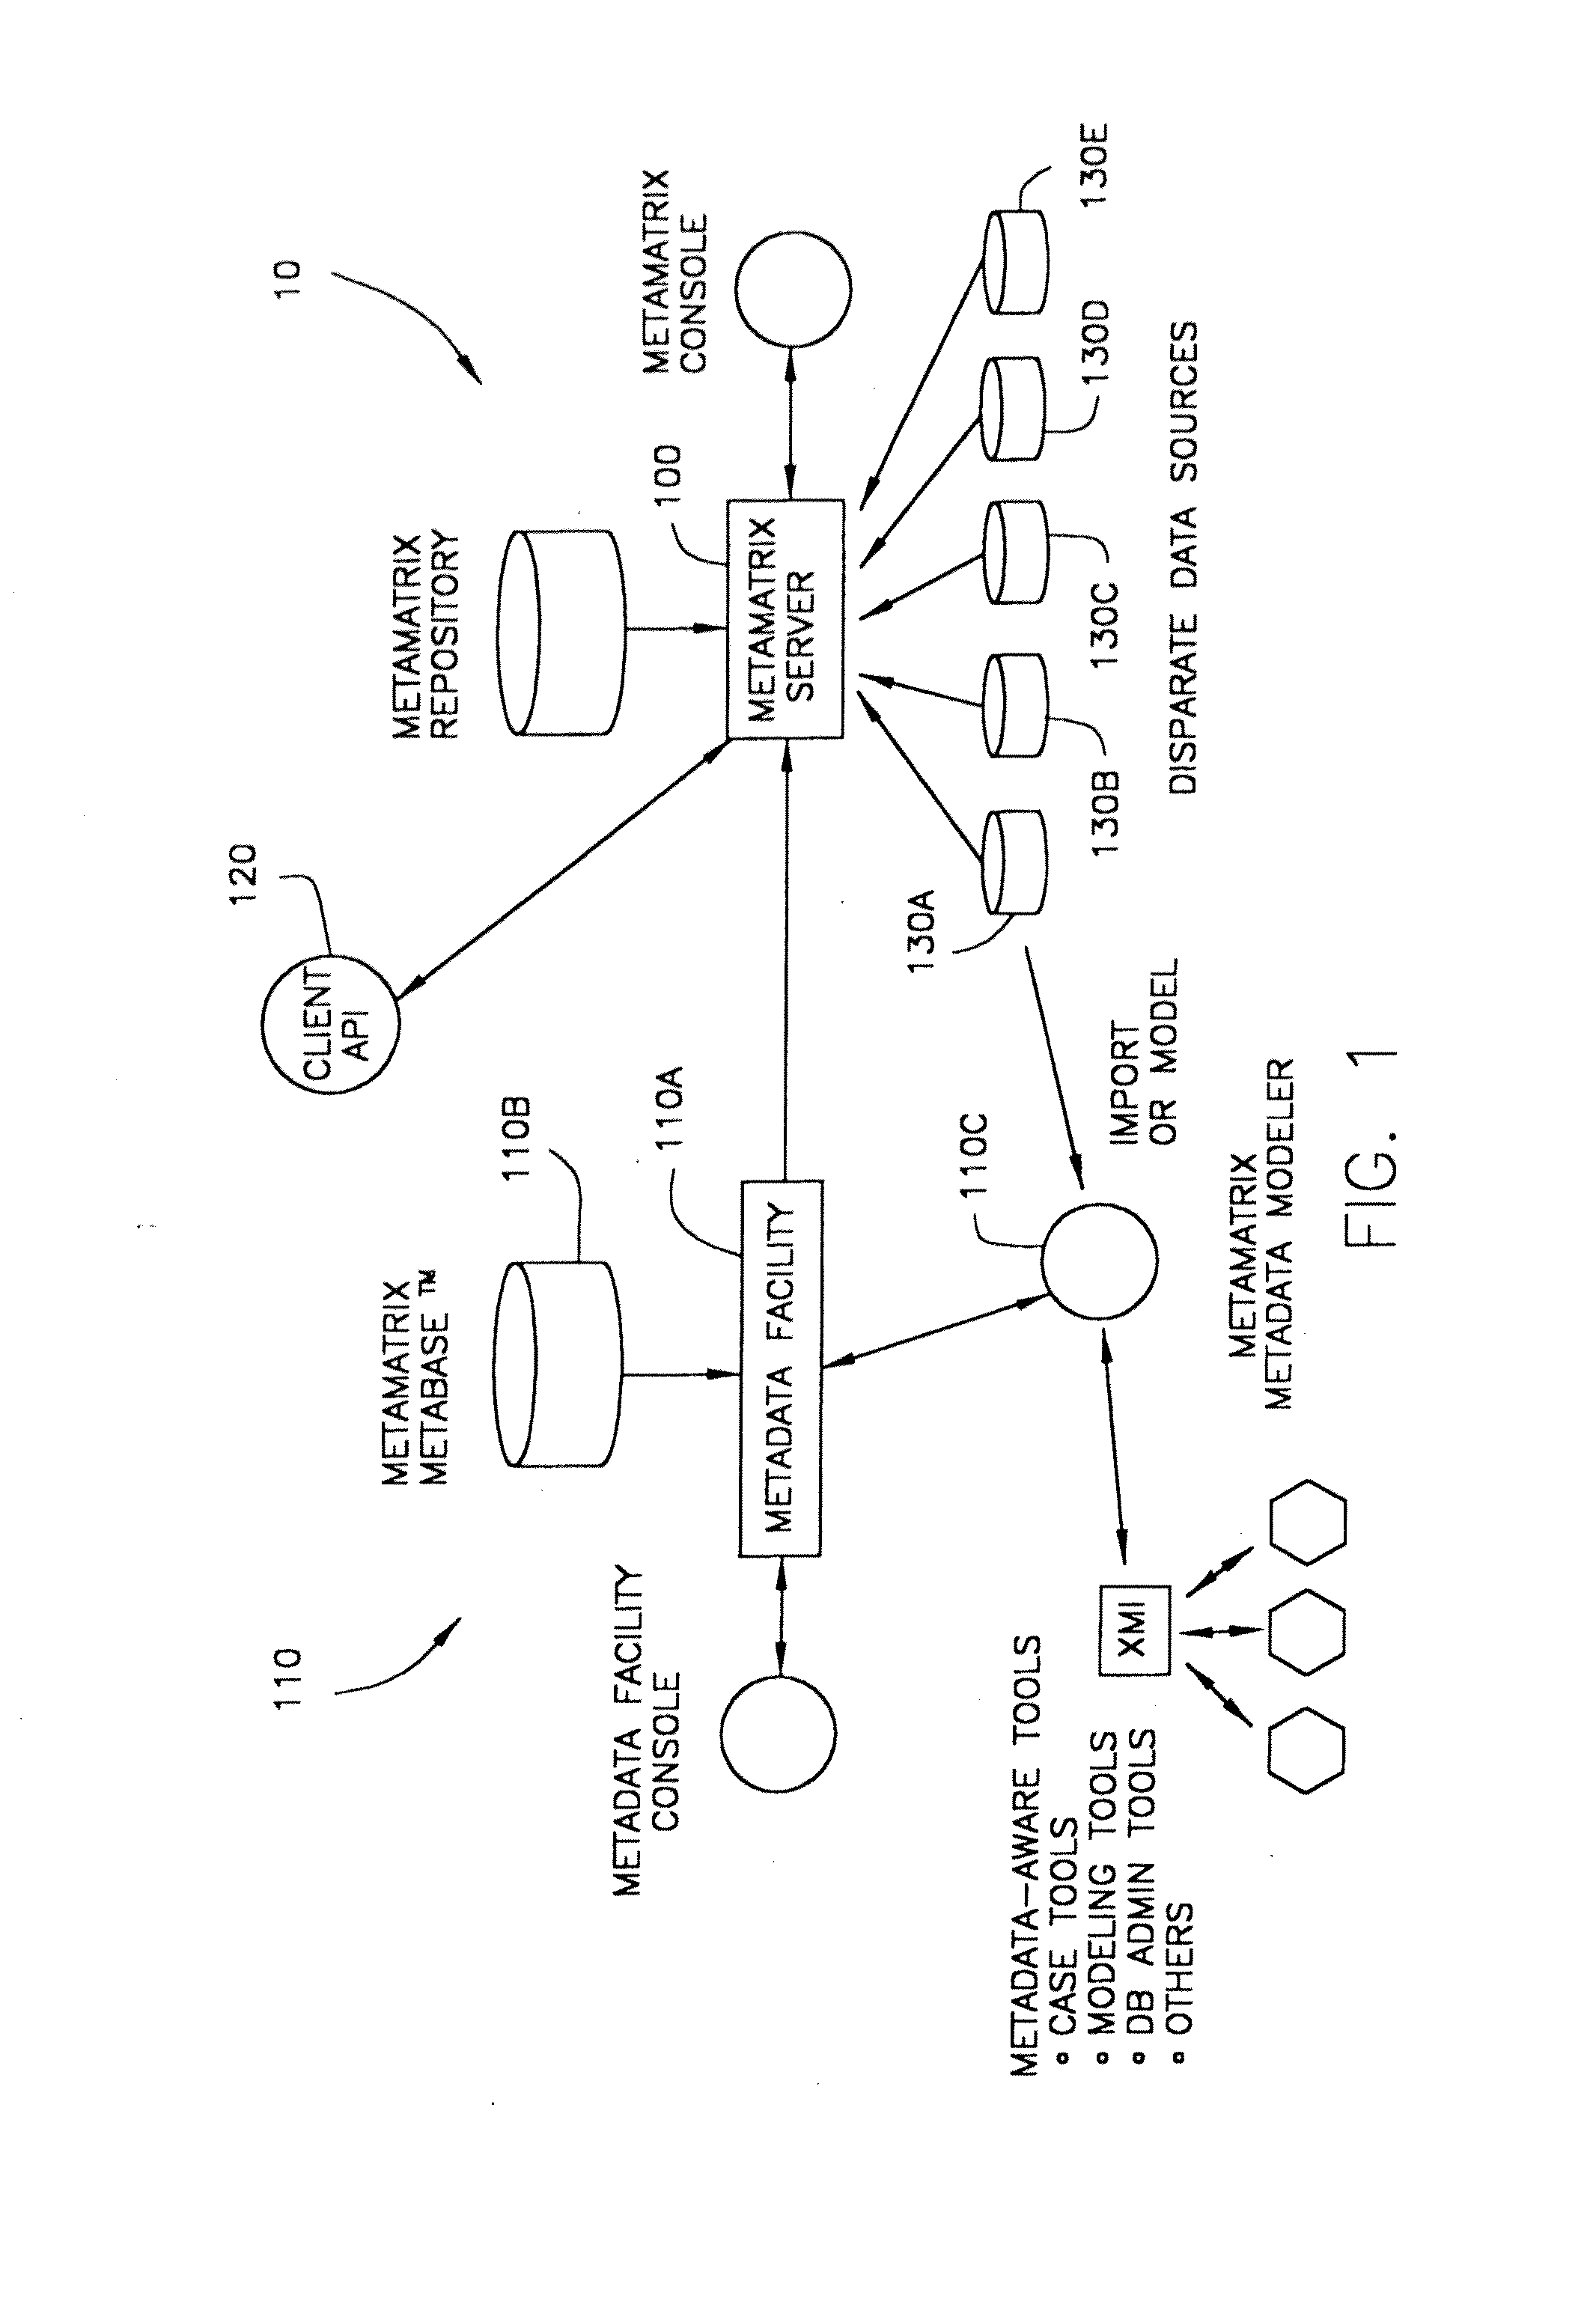 System and method for accessing data in disparate information sources